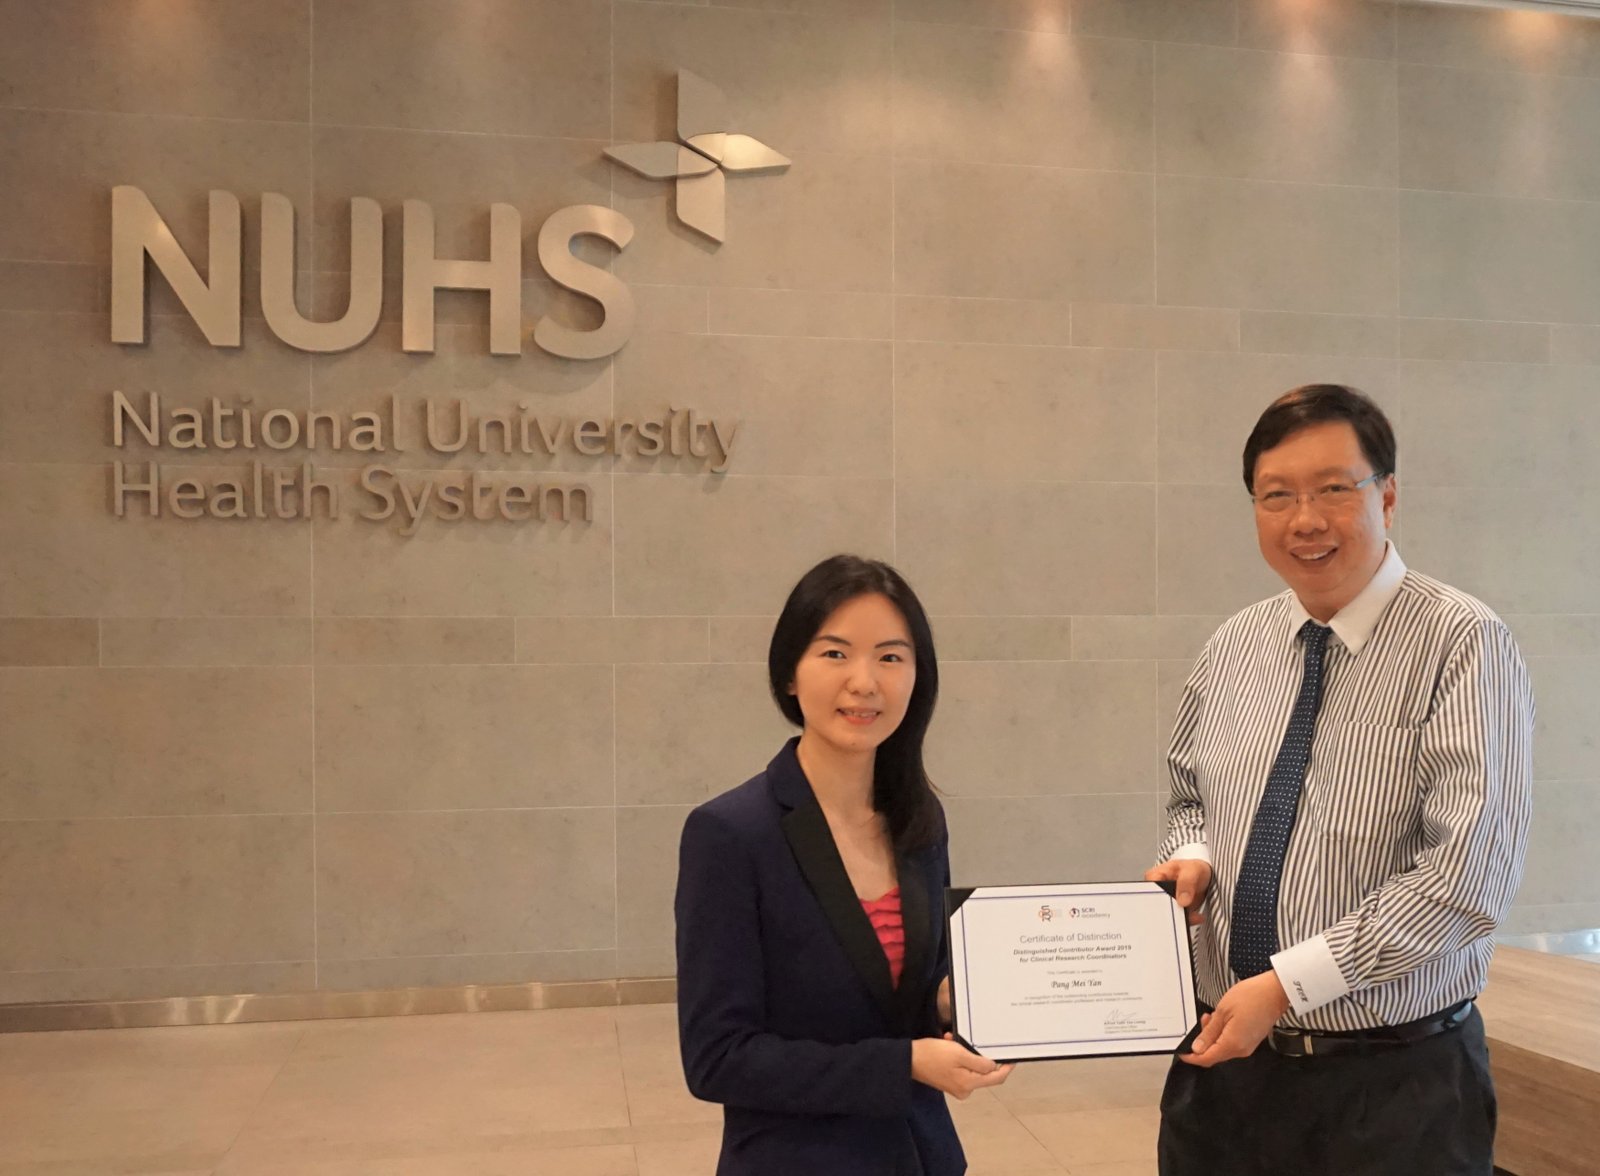 Associate Professor Teoh Yee Leong, CEO of Singapore Clinical Research Institute (right) presenting the inaugural Distinguished Contributor Award to Ms Pang Mei Yan, the winner of The Distinction Award.